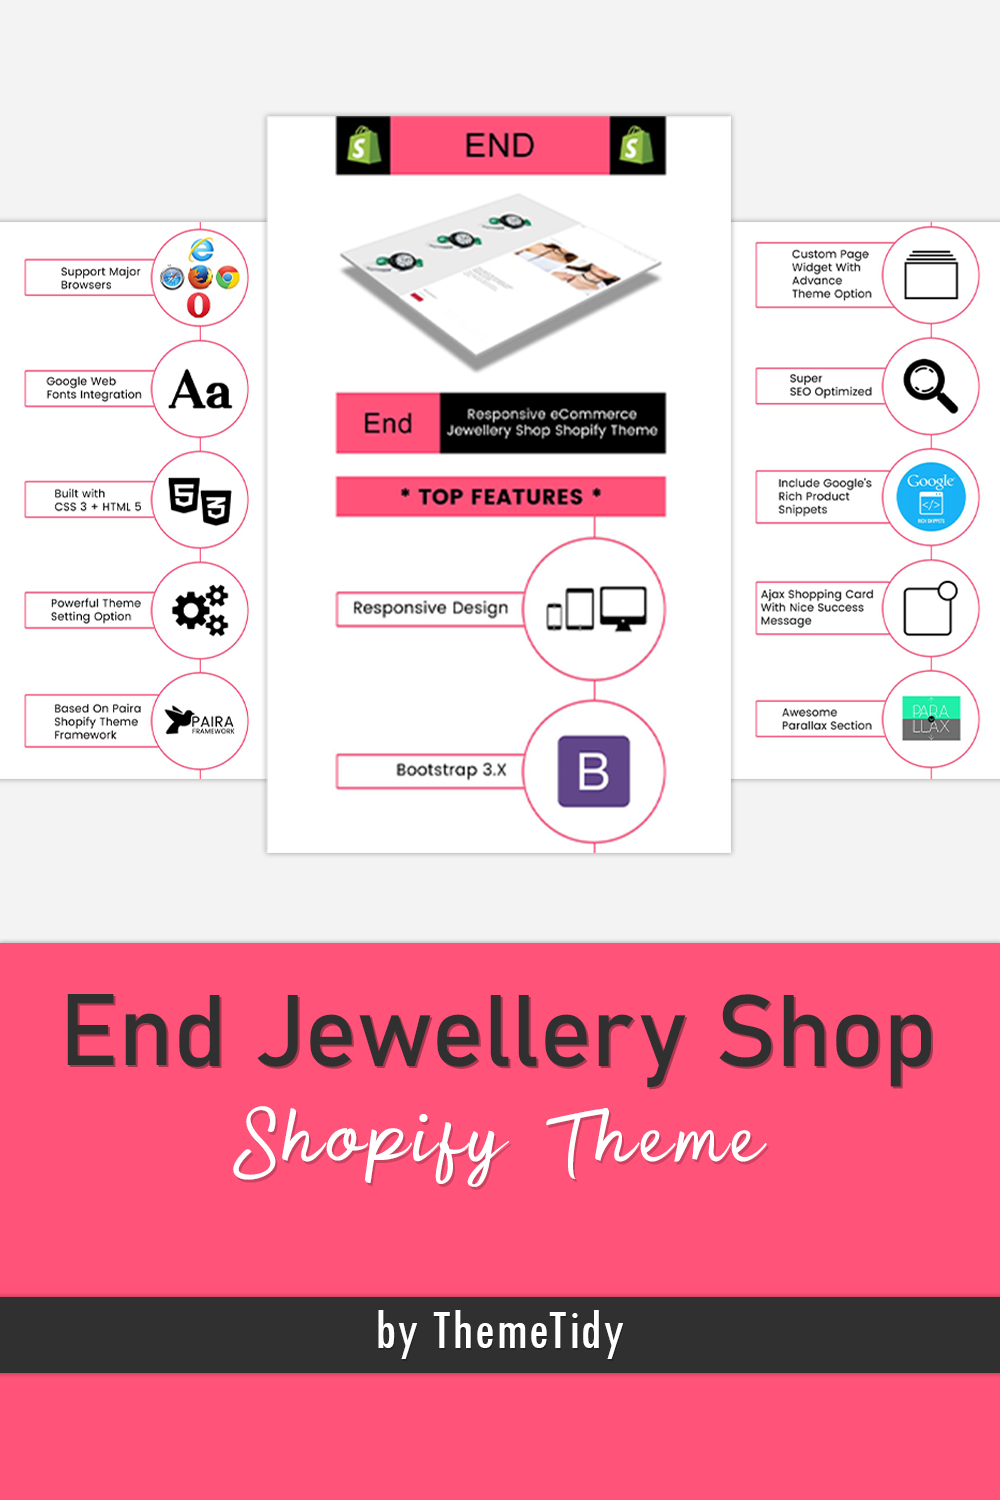 End jewellery shop shopify theme images of pinterest.